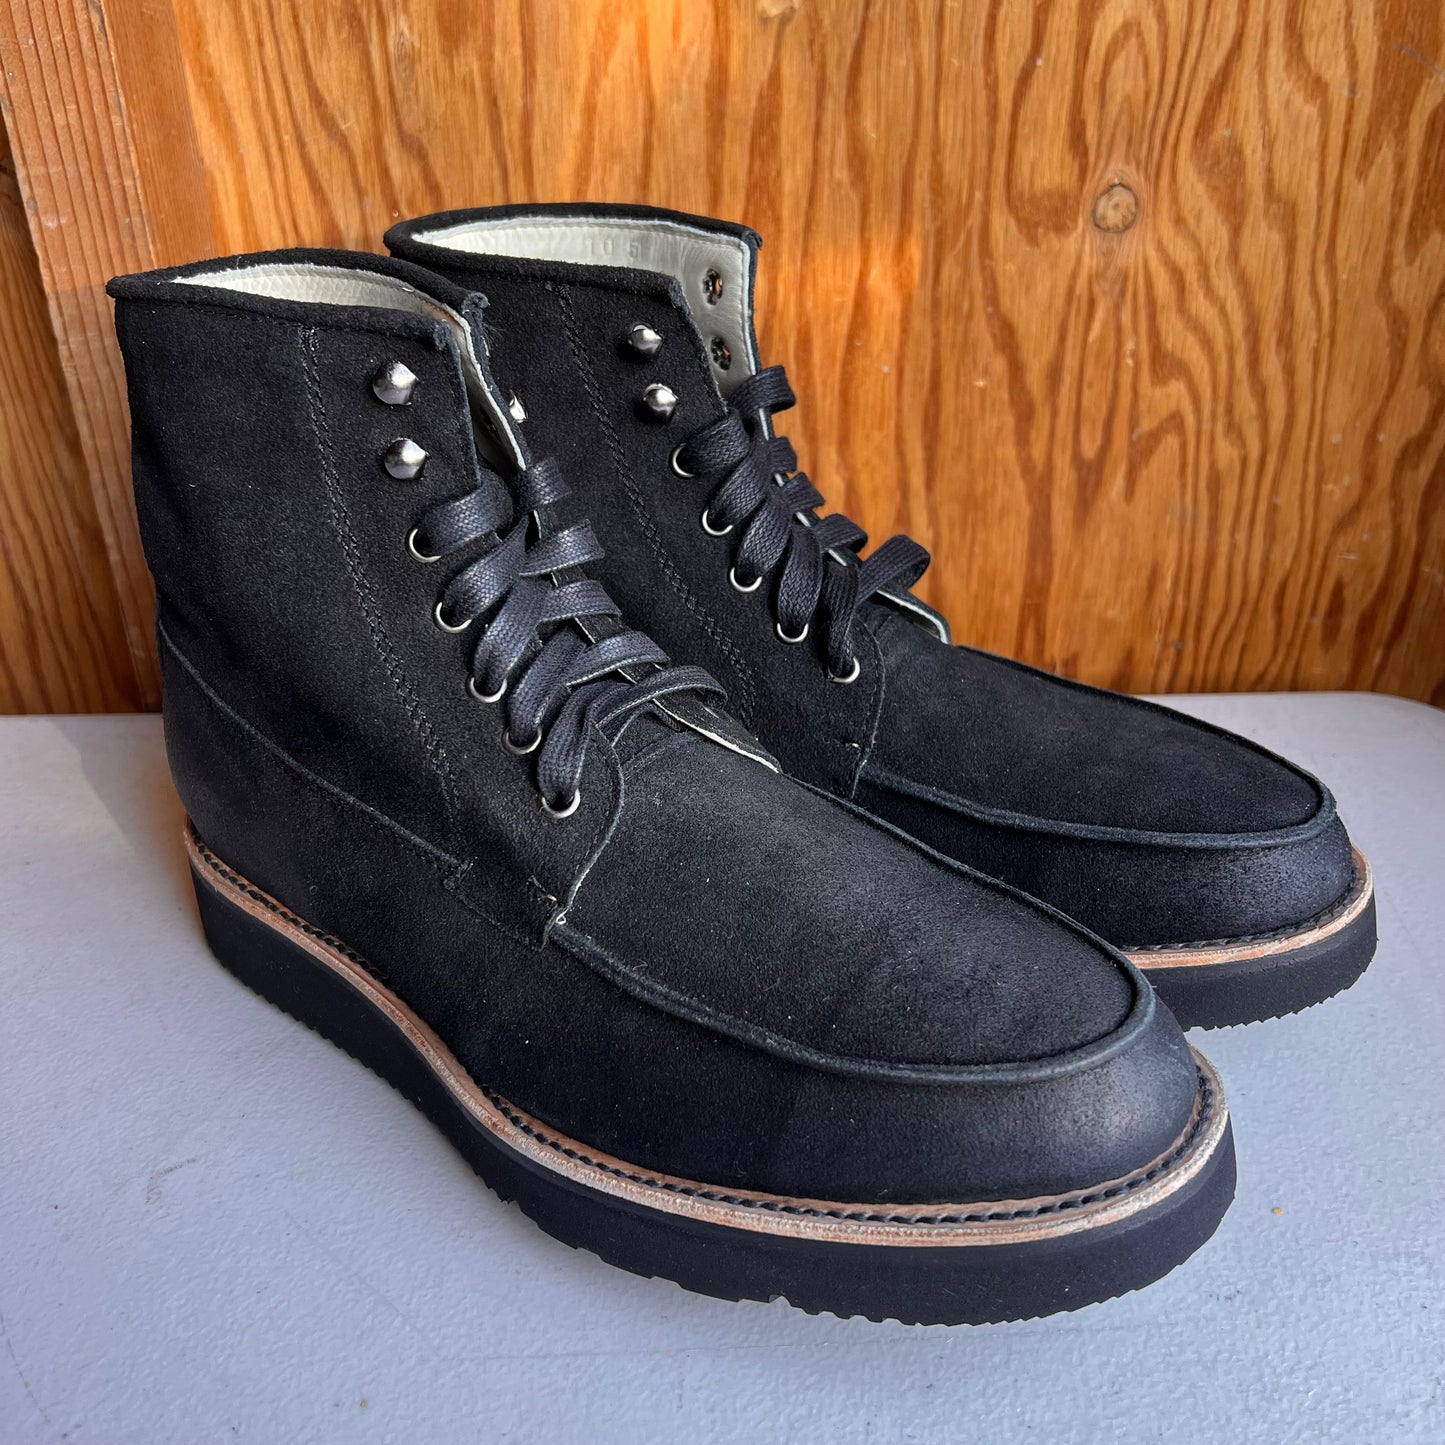 Nomad - Waxed Midnight Suede Size 10.5